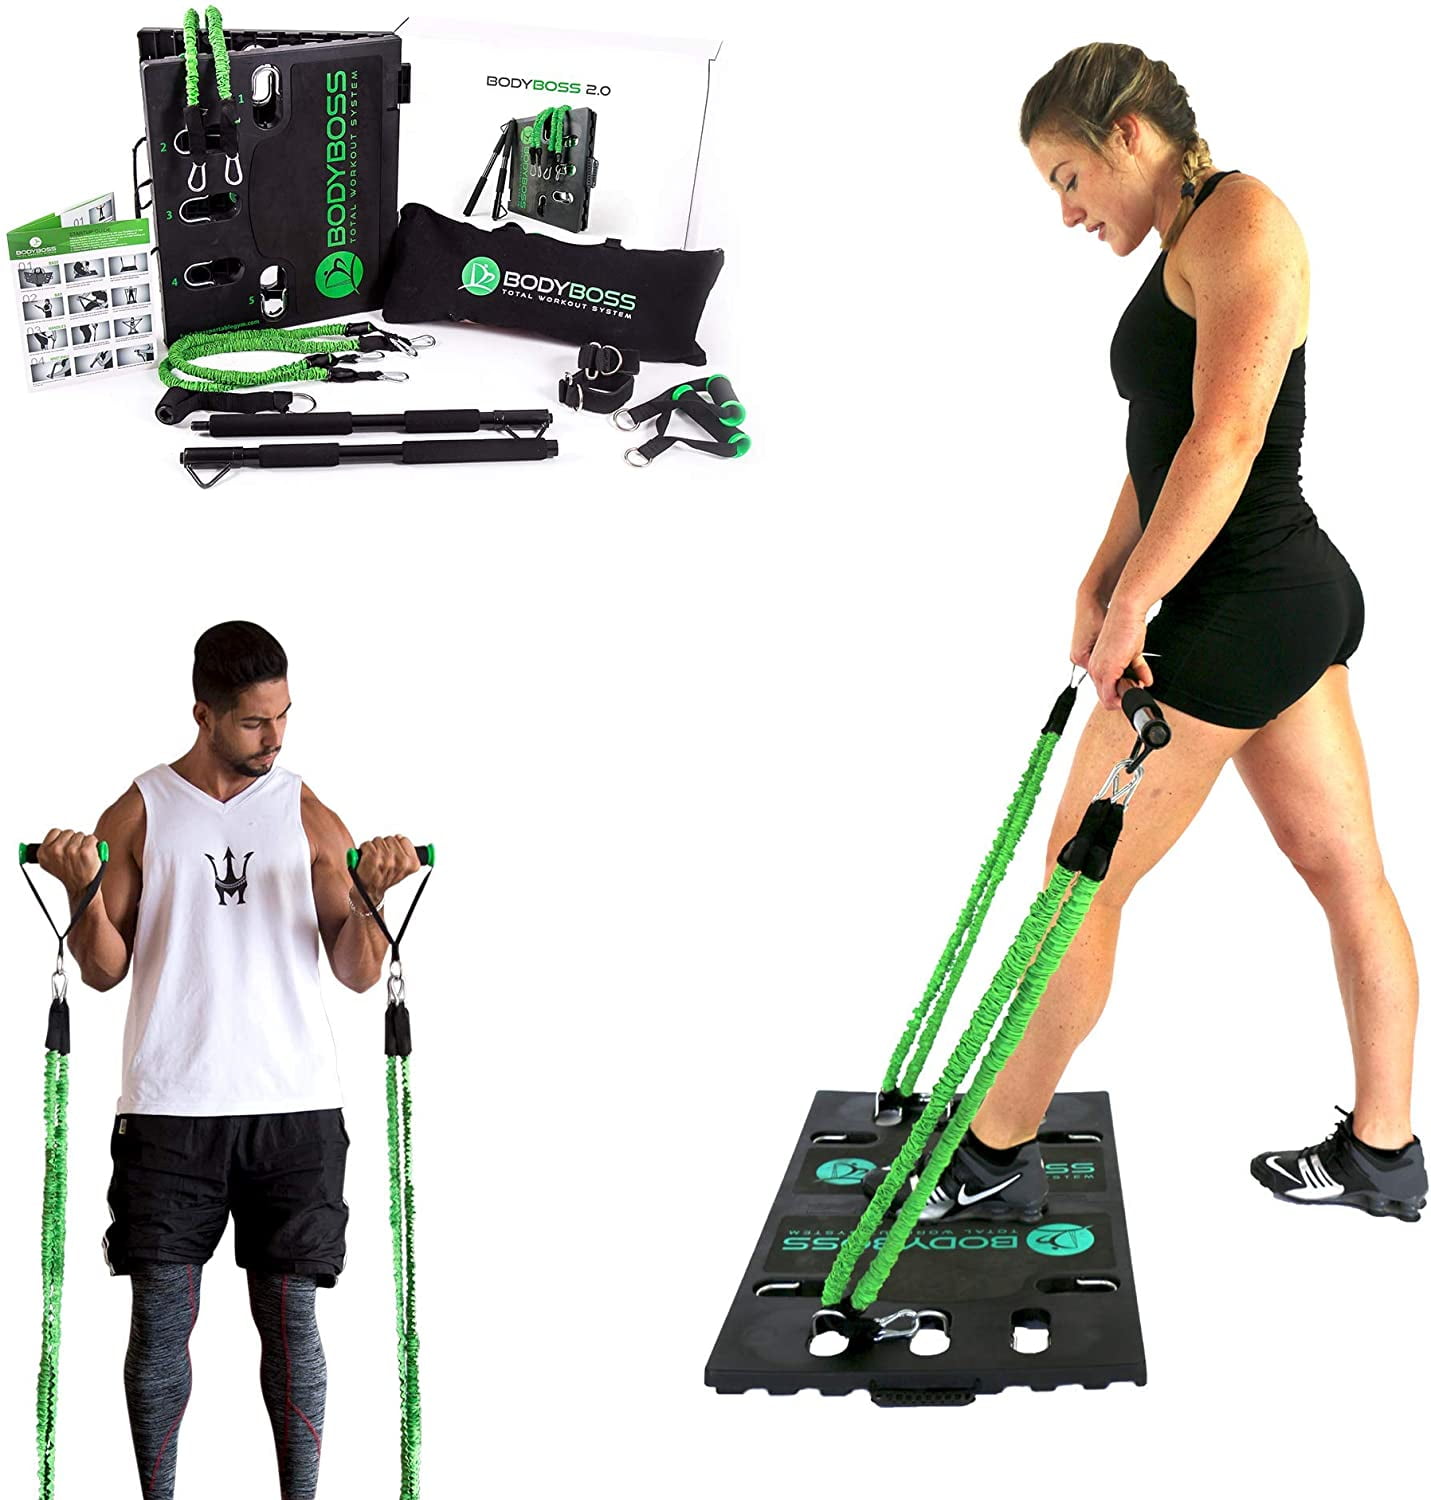 BodyBoss 2.0 Green - Full Portable Home Gym Workout Package + Resistance  Bands - Collapsible Resistance Bar, Handles - Full Body Workouts for Home,  